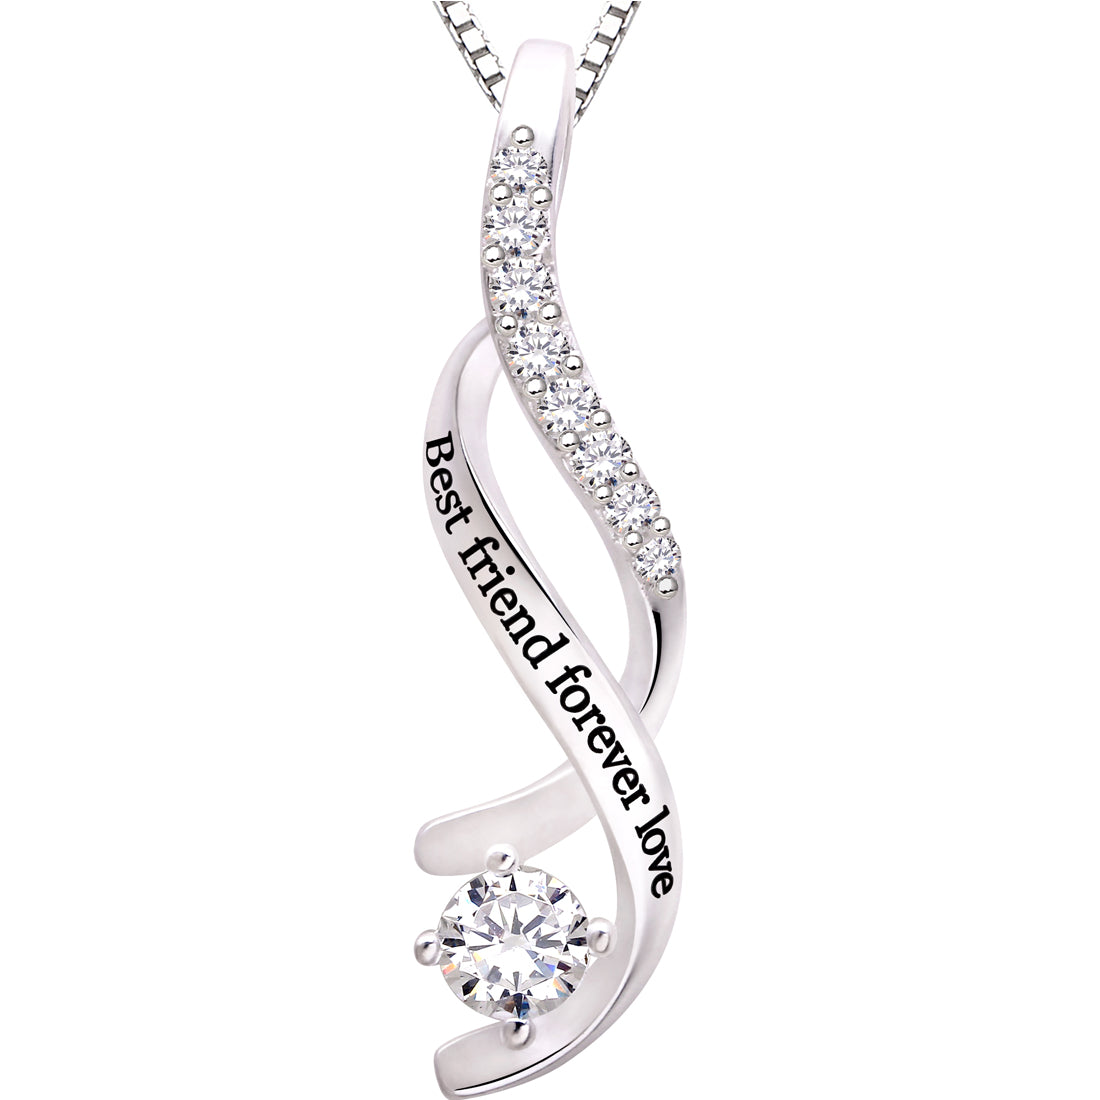 ALOV Jewelry Sterling Silver Best friend forever love Cubic Zirconia Pendant Necklace